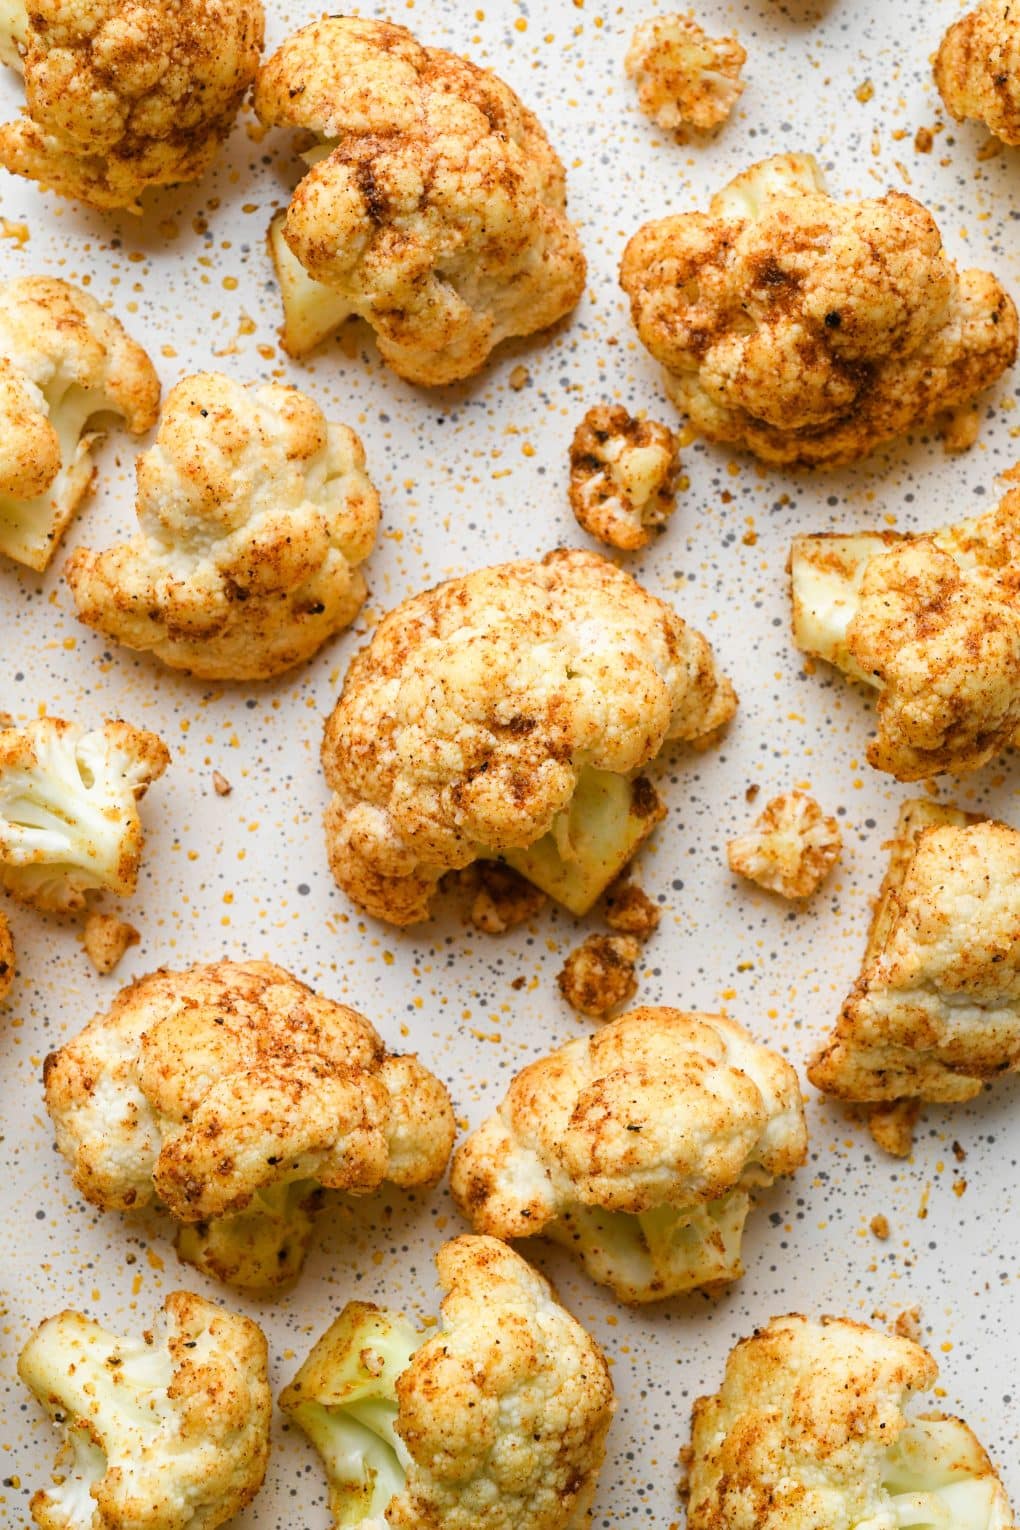 How to make Mexican Roasted Cauliflower: Up close shot of raw cauliflower florets tossed with oil and spices on a baking sheet.